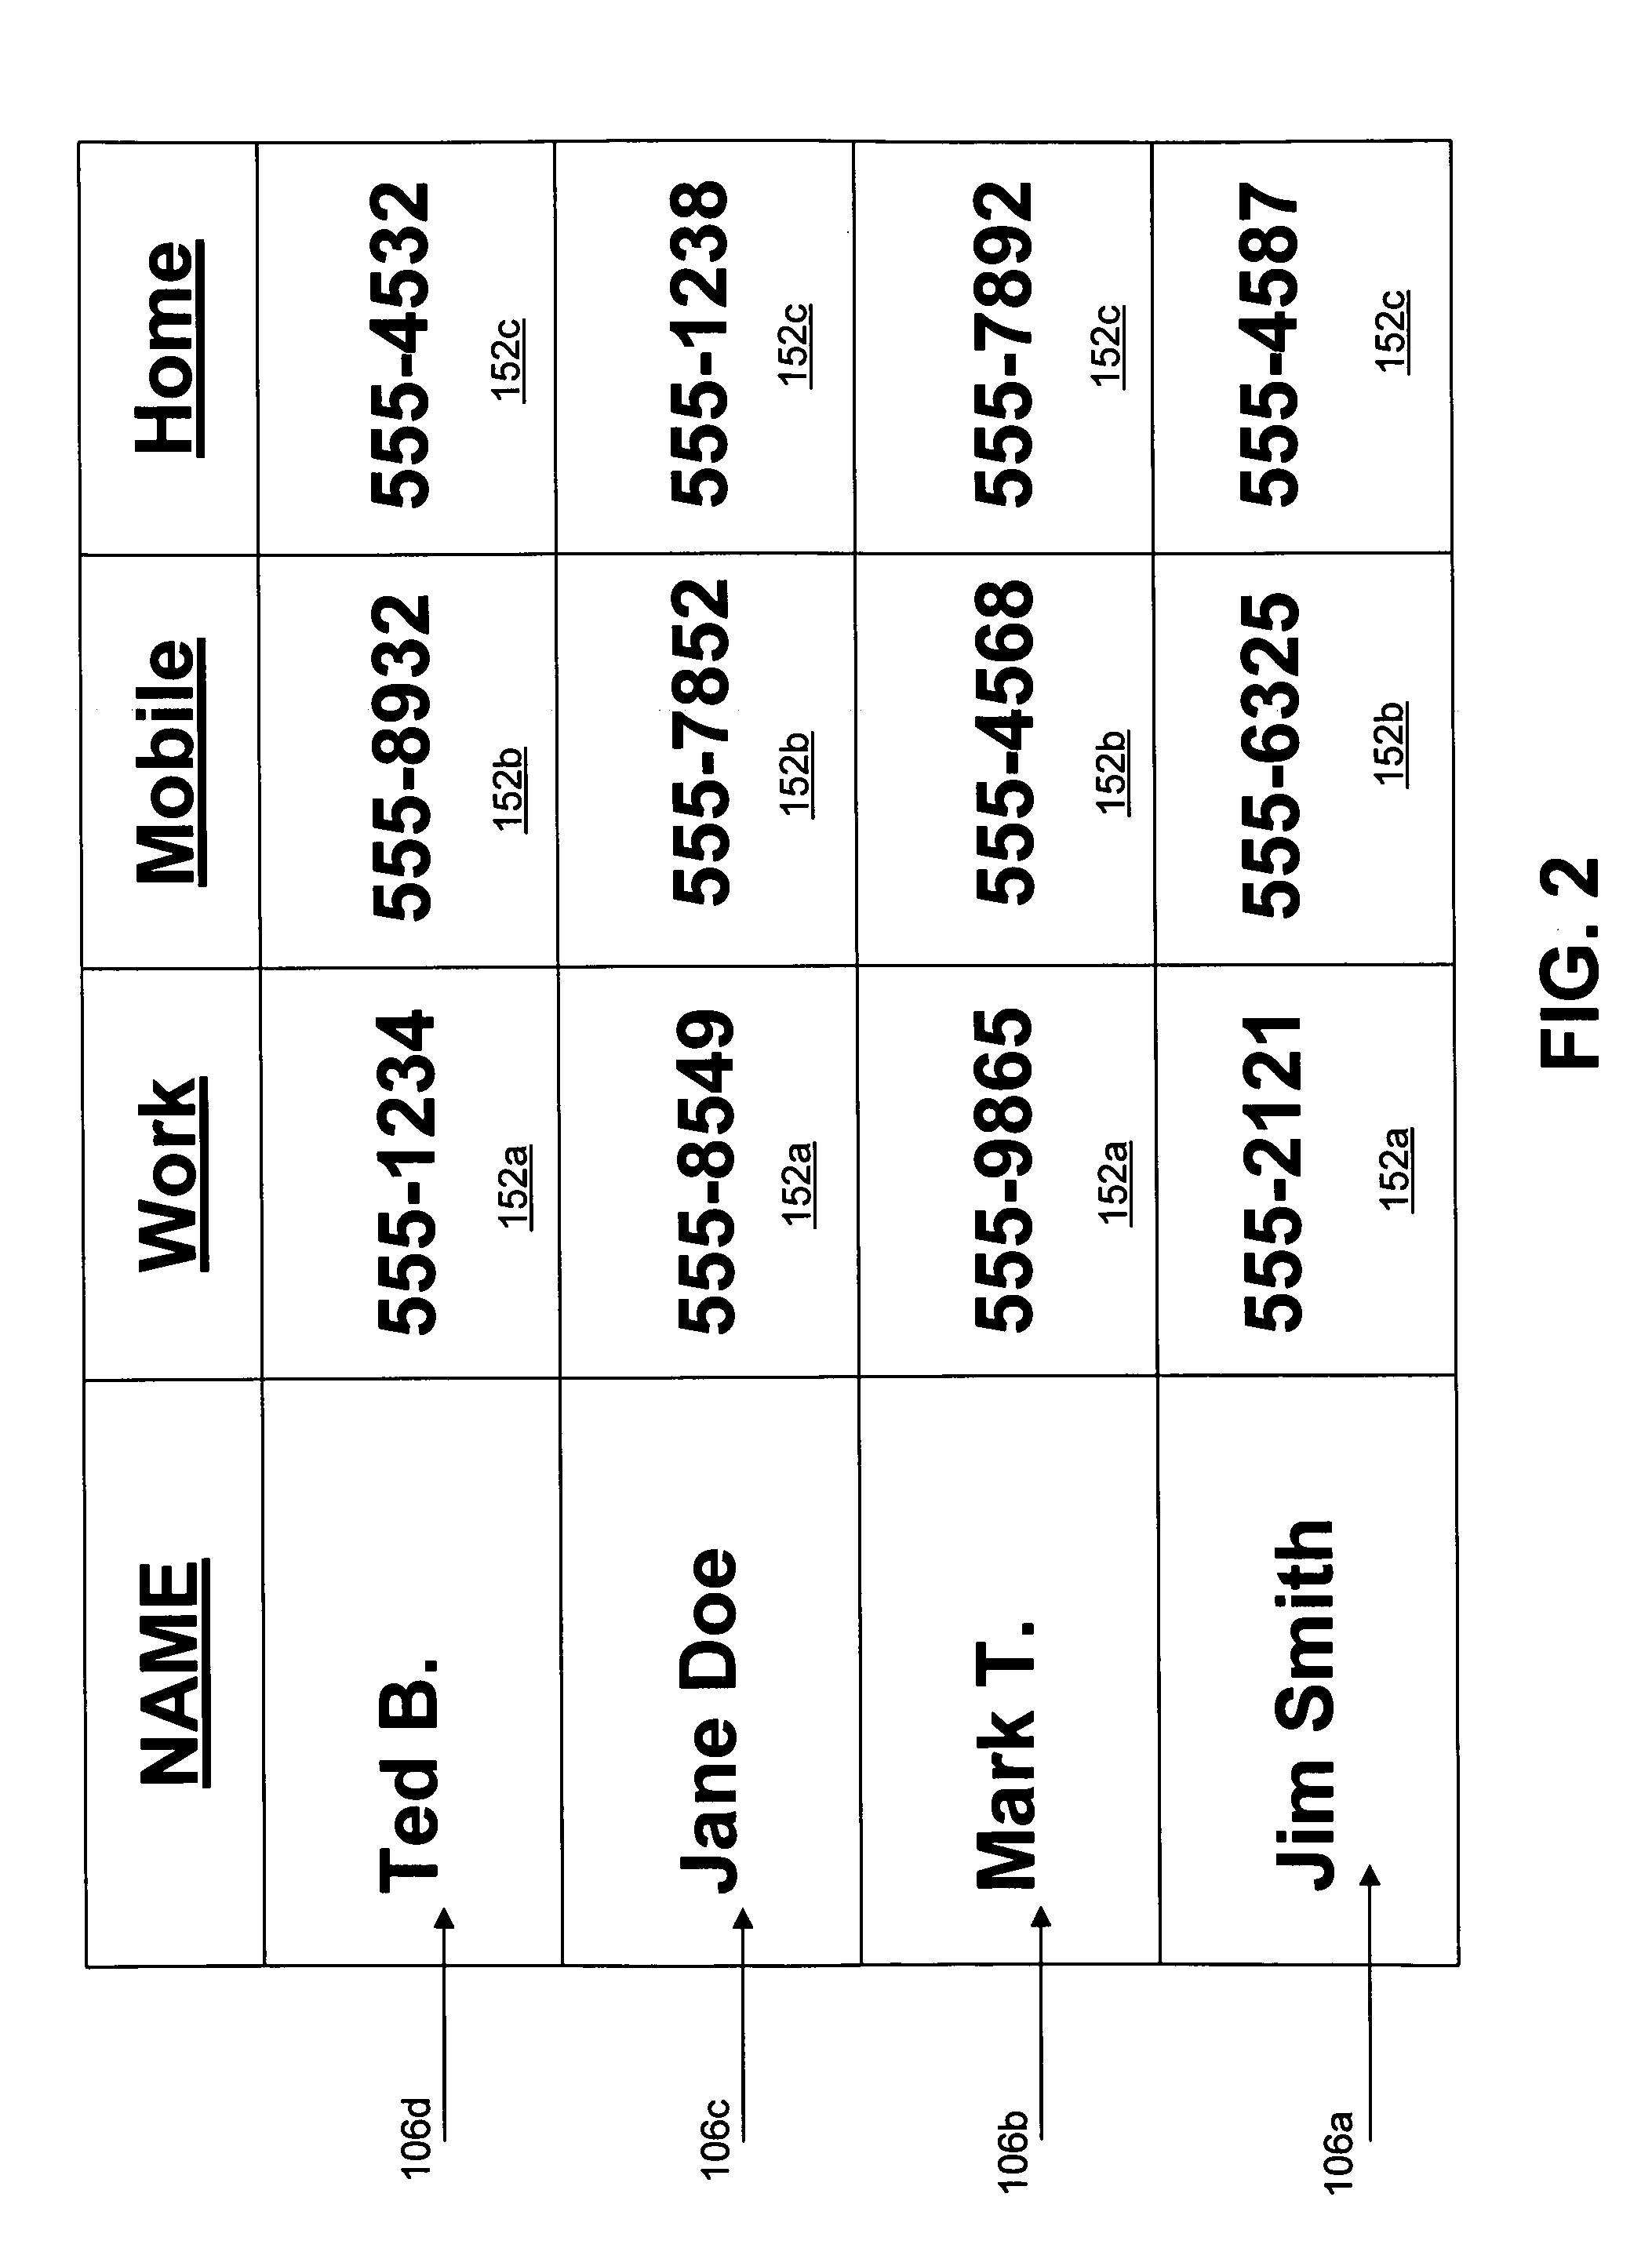 System and method for displaying two-dimensional data on small screen devices